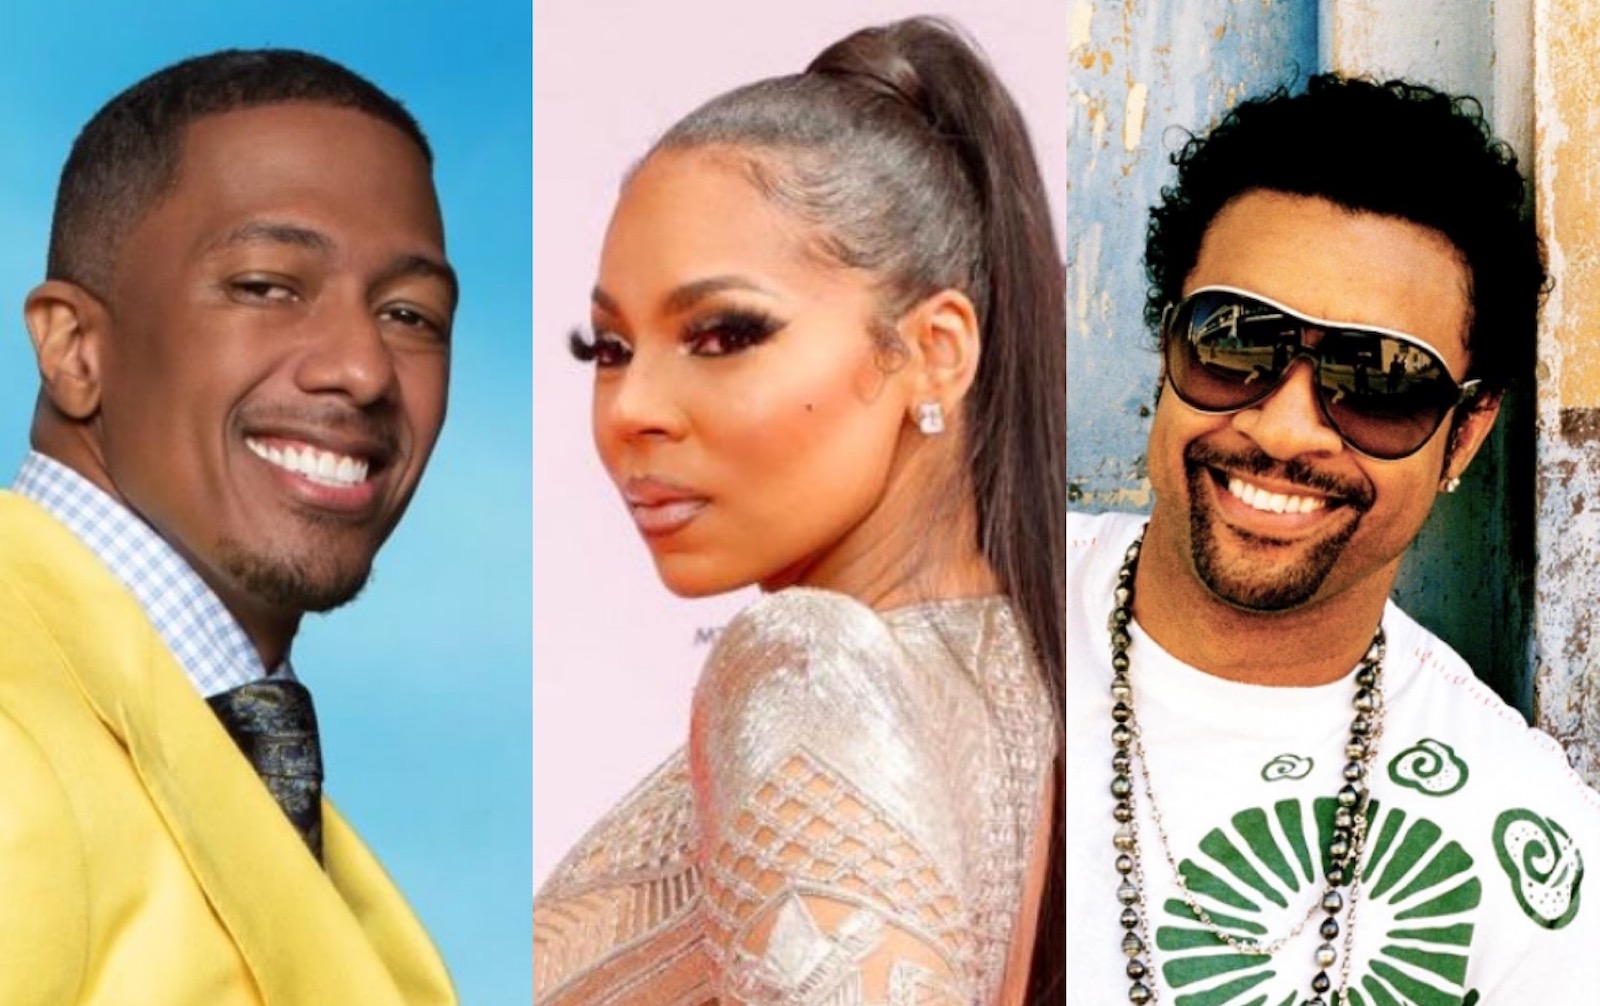 Nick Cannon claims he didn't propose to Ashanti at VMAs 2021